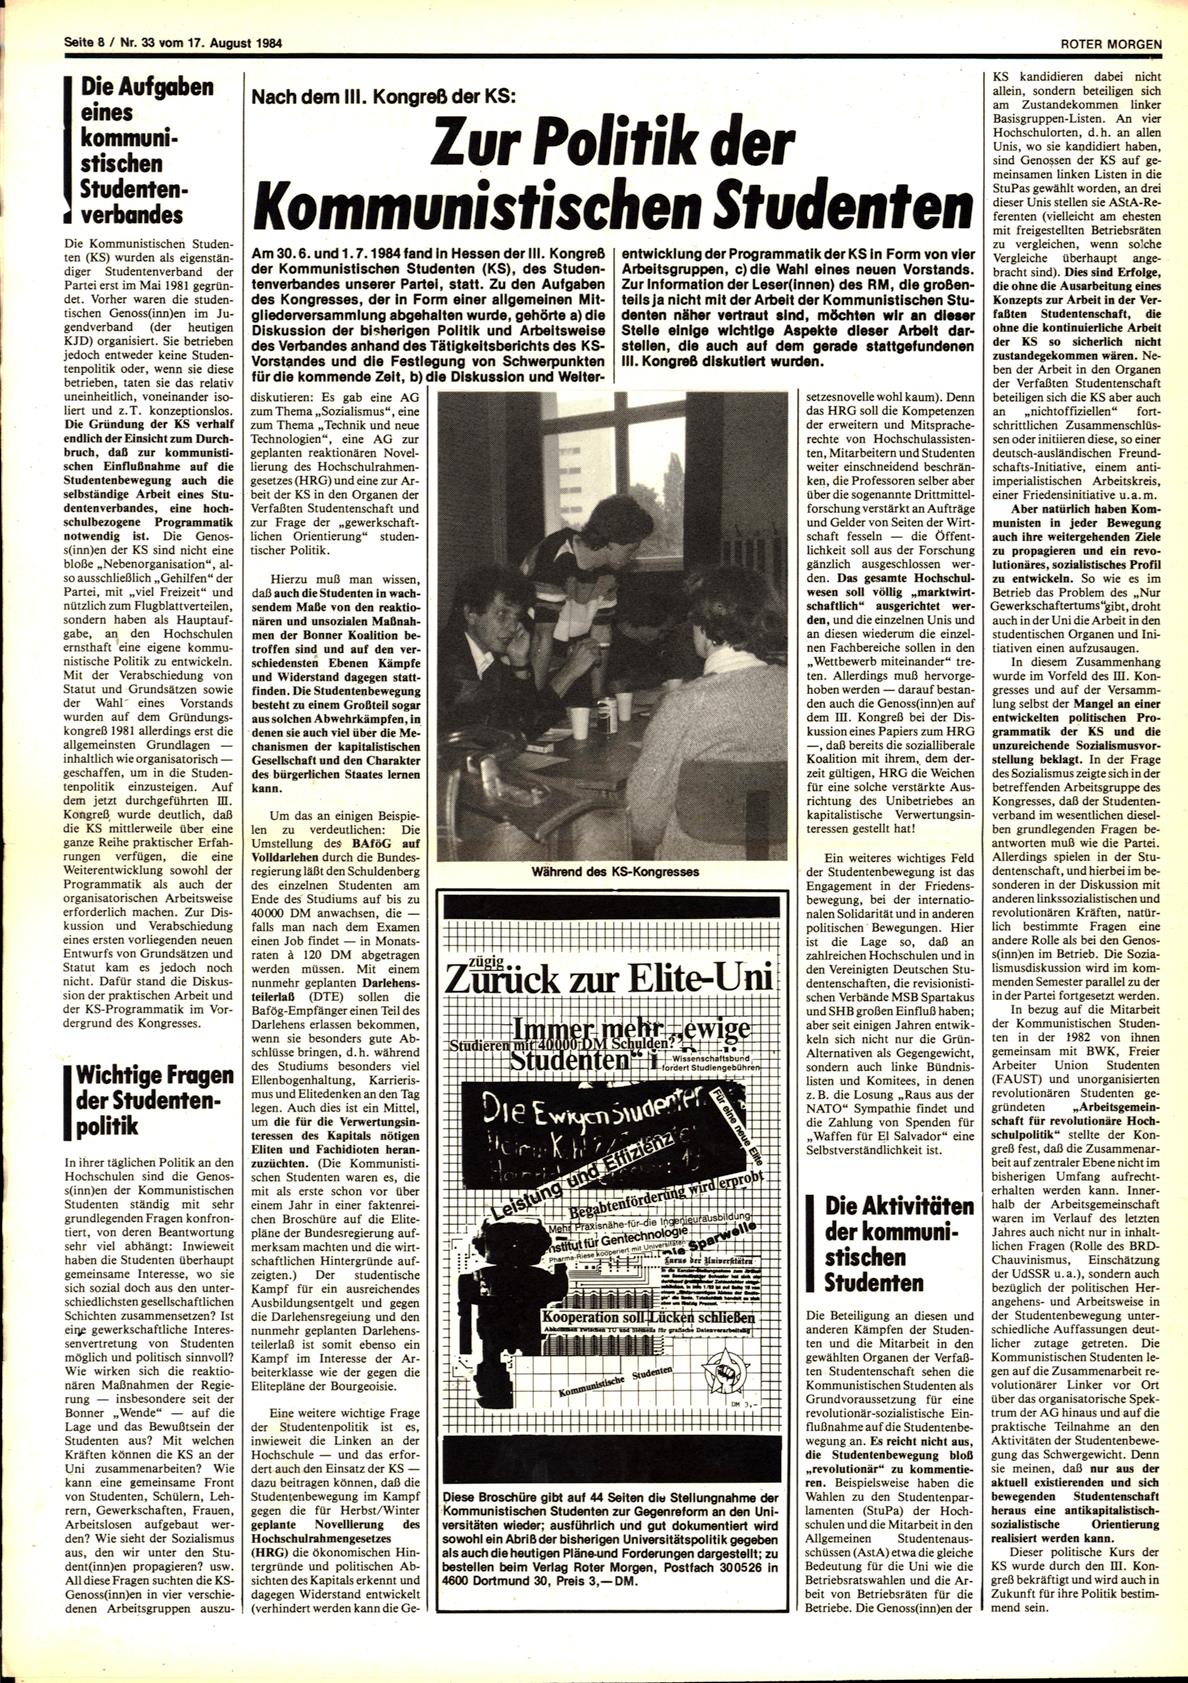 Roter Morgen, 18. Jg., 17. August 1984, Nr. 33, Seite 8